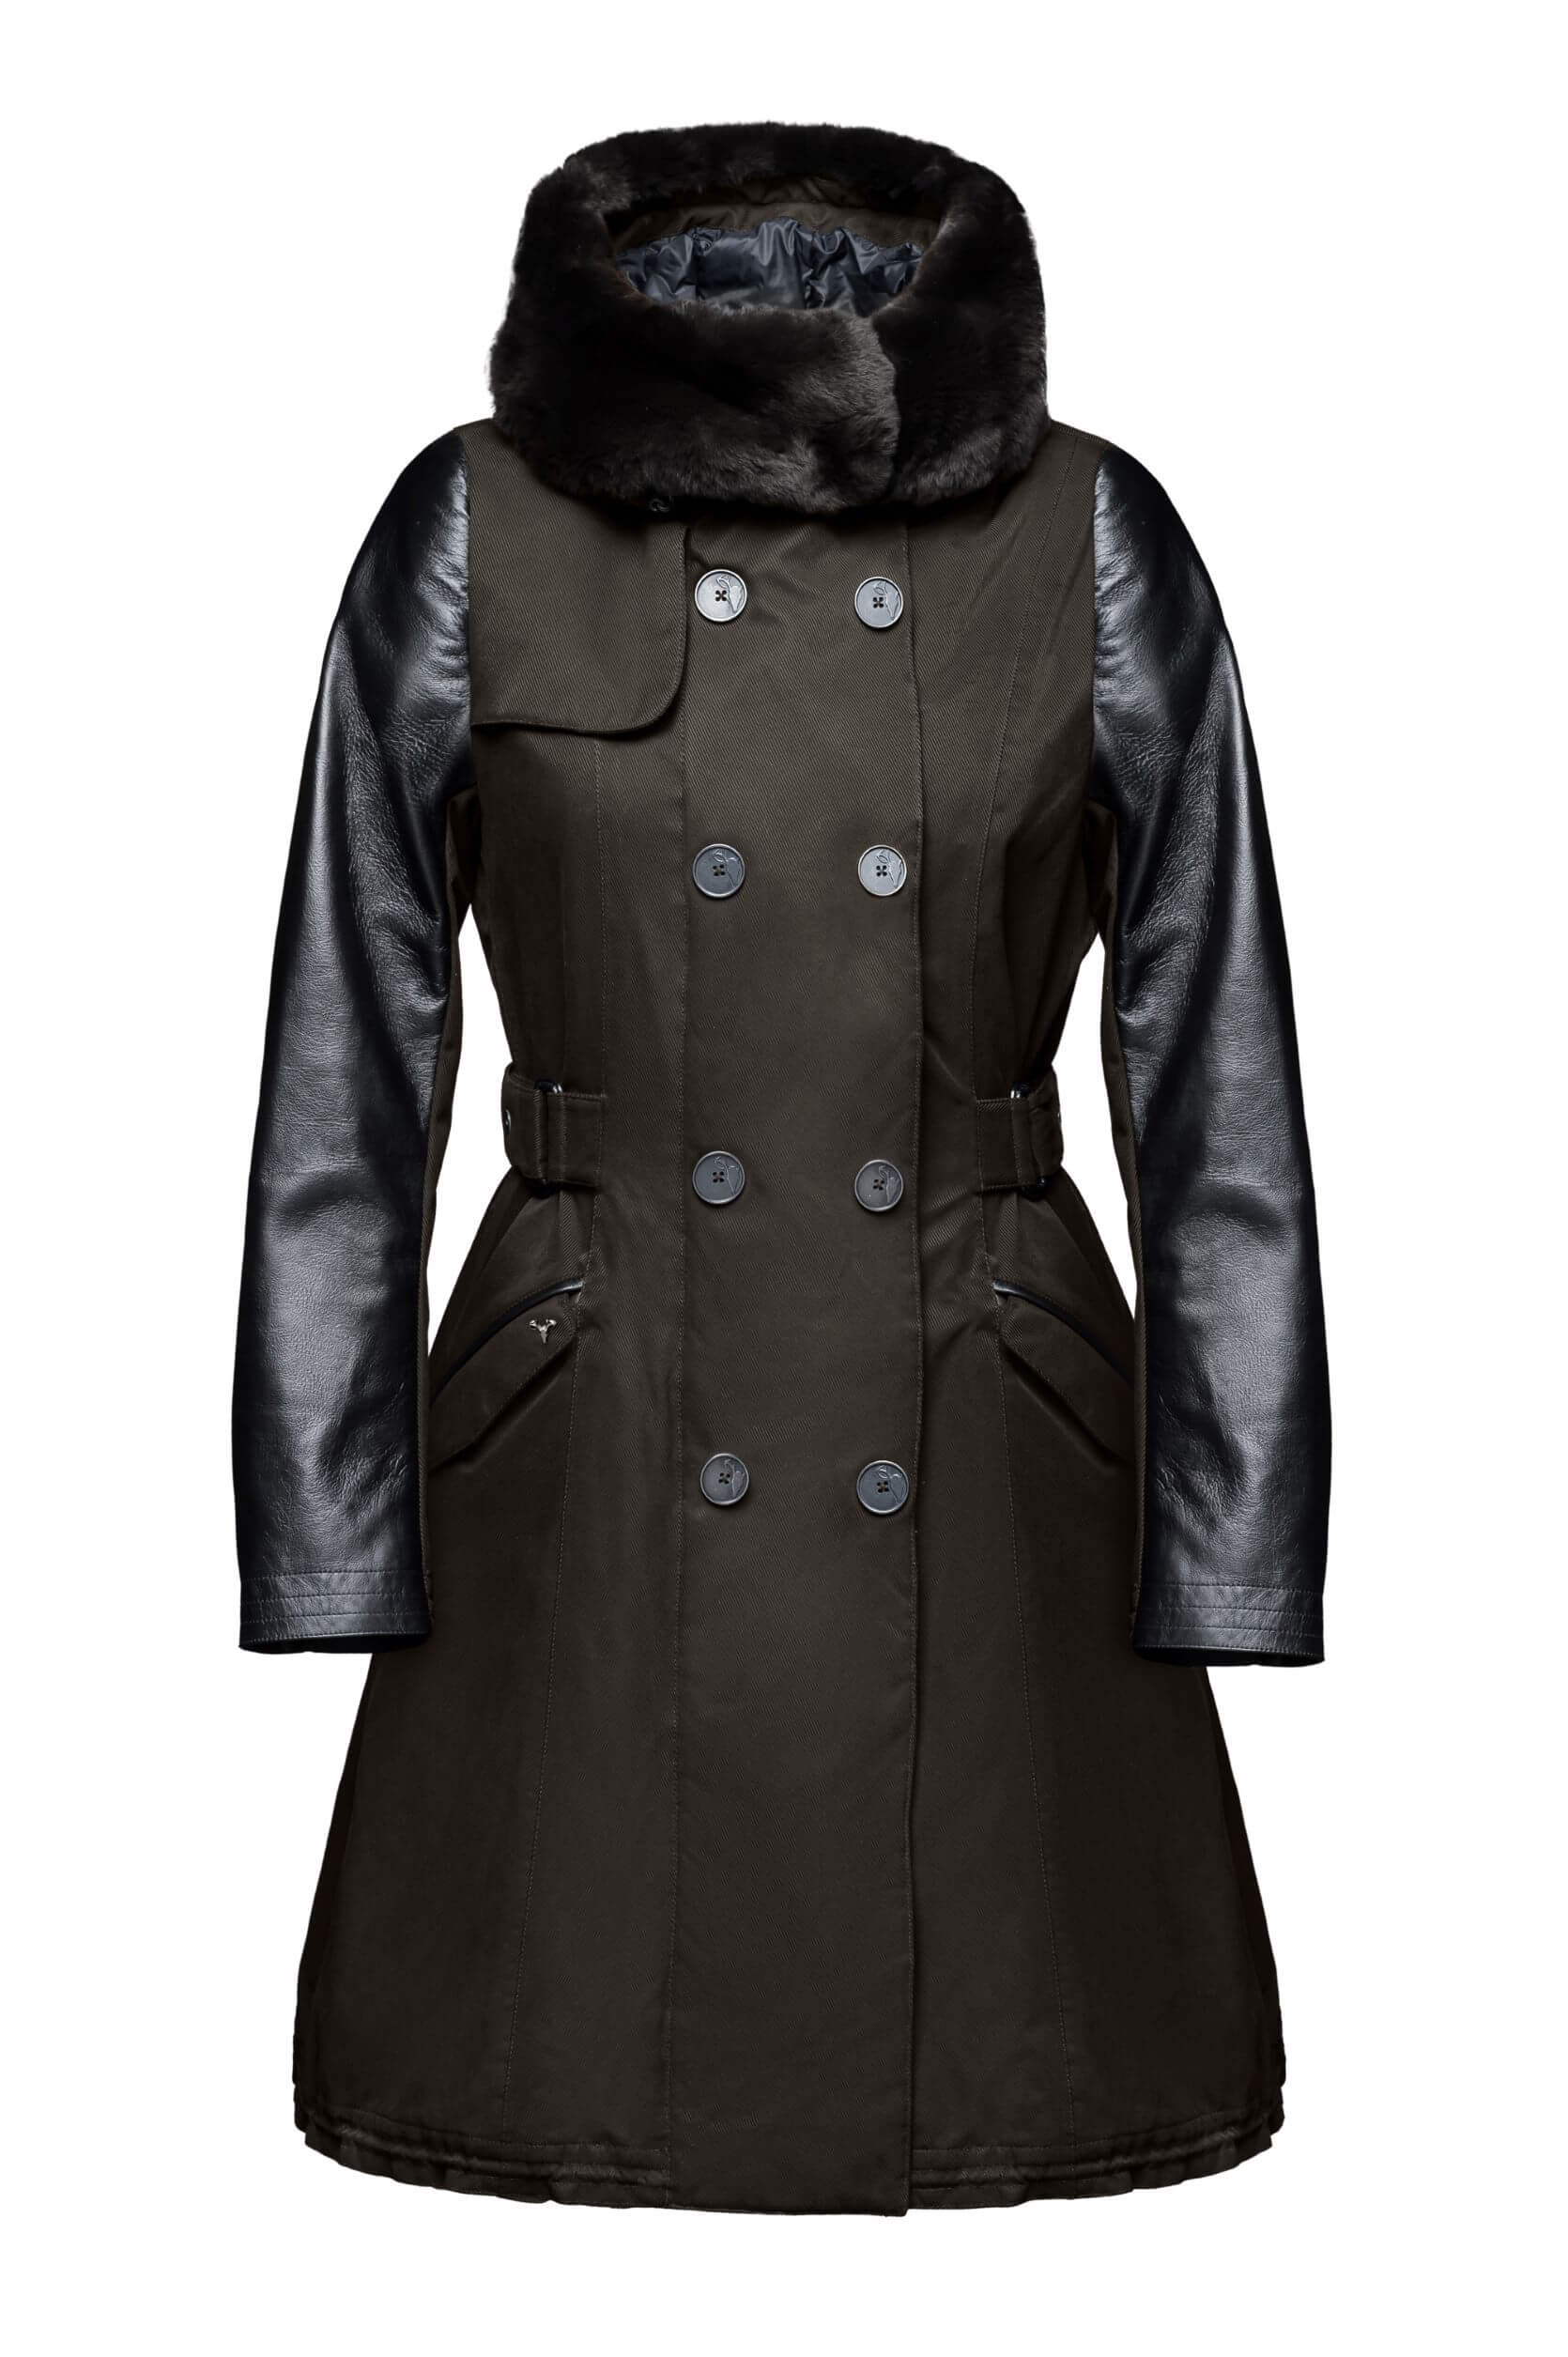 Women's down filled overcoat with double breasted closure and removable down filled lined in Dark Brown